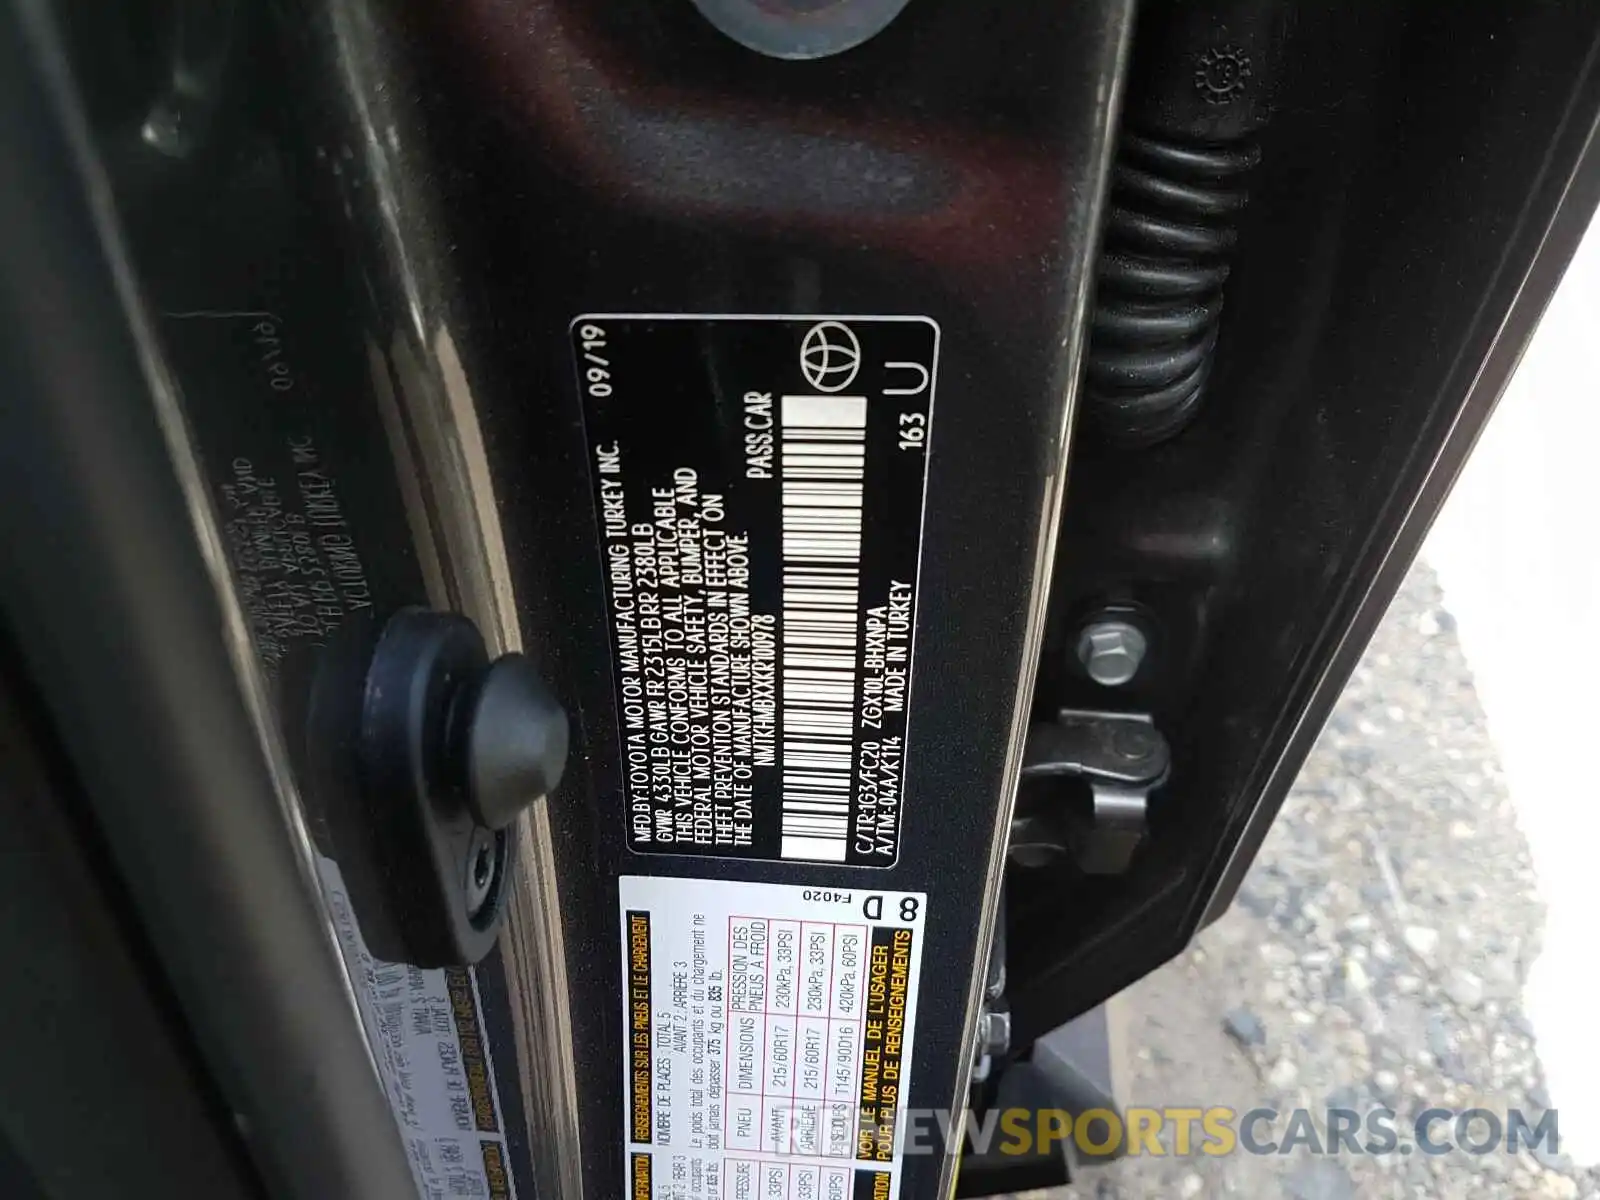 10 Photograph of a damaged car NMTKHMBXXKR100978 TOYOTA C-HR 2019